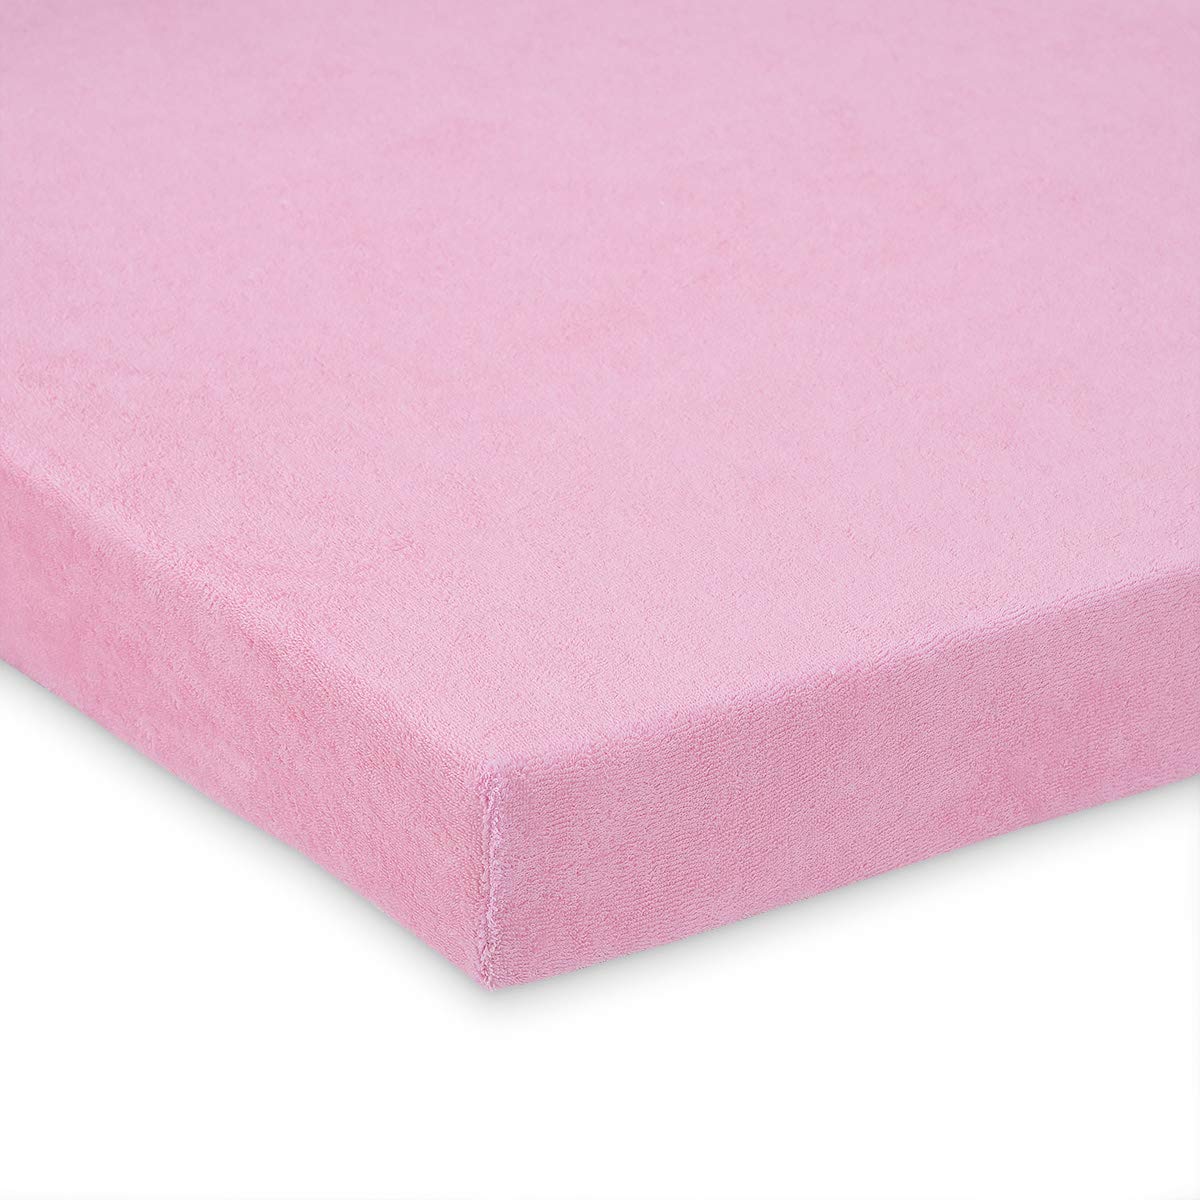 FabiMax 2885 Terry Towelling Fitted Sheet for Bassinets and Handcart, 45 x 85 cm, Pink